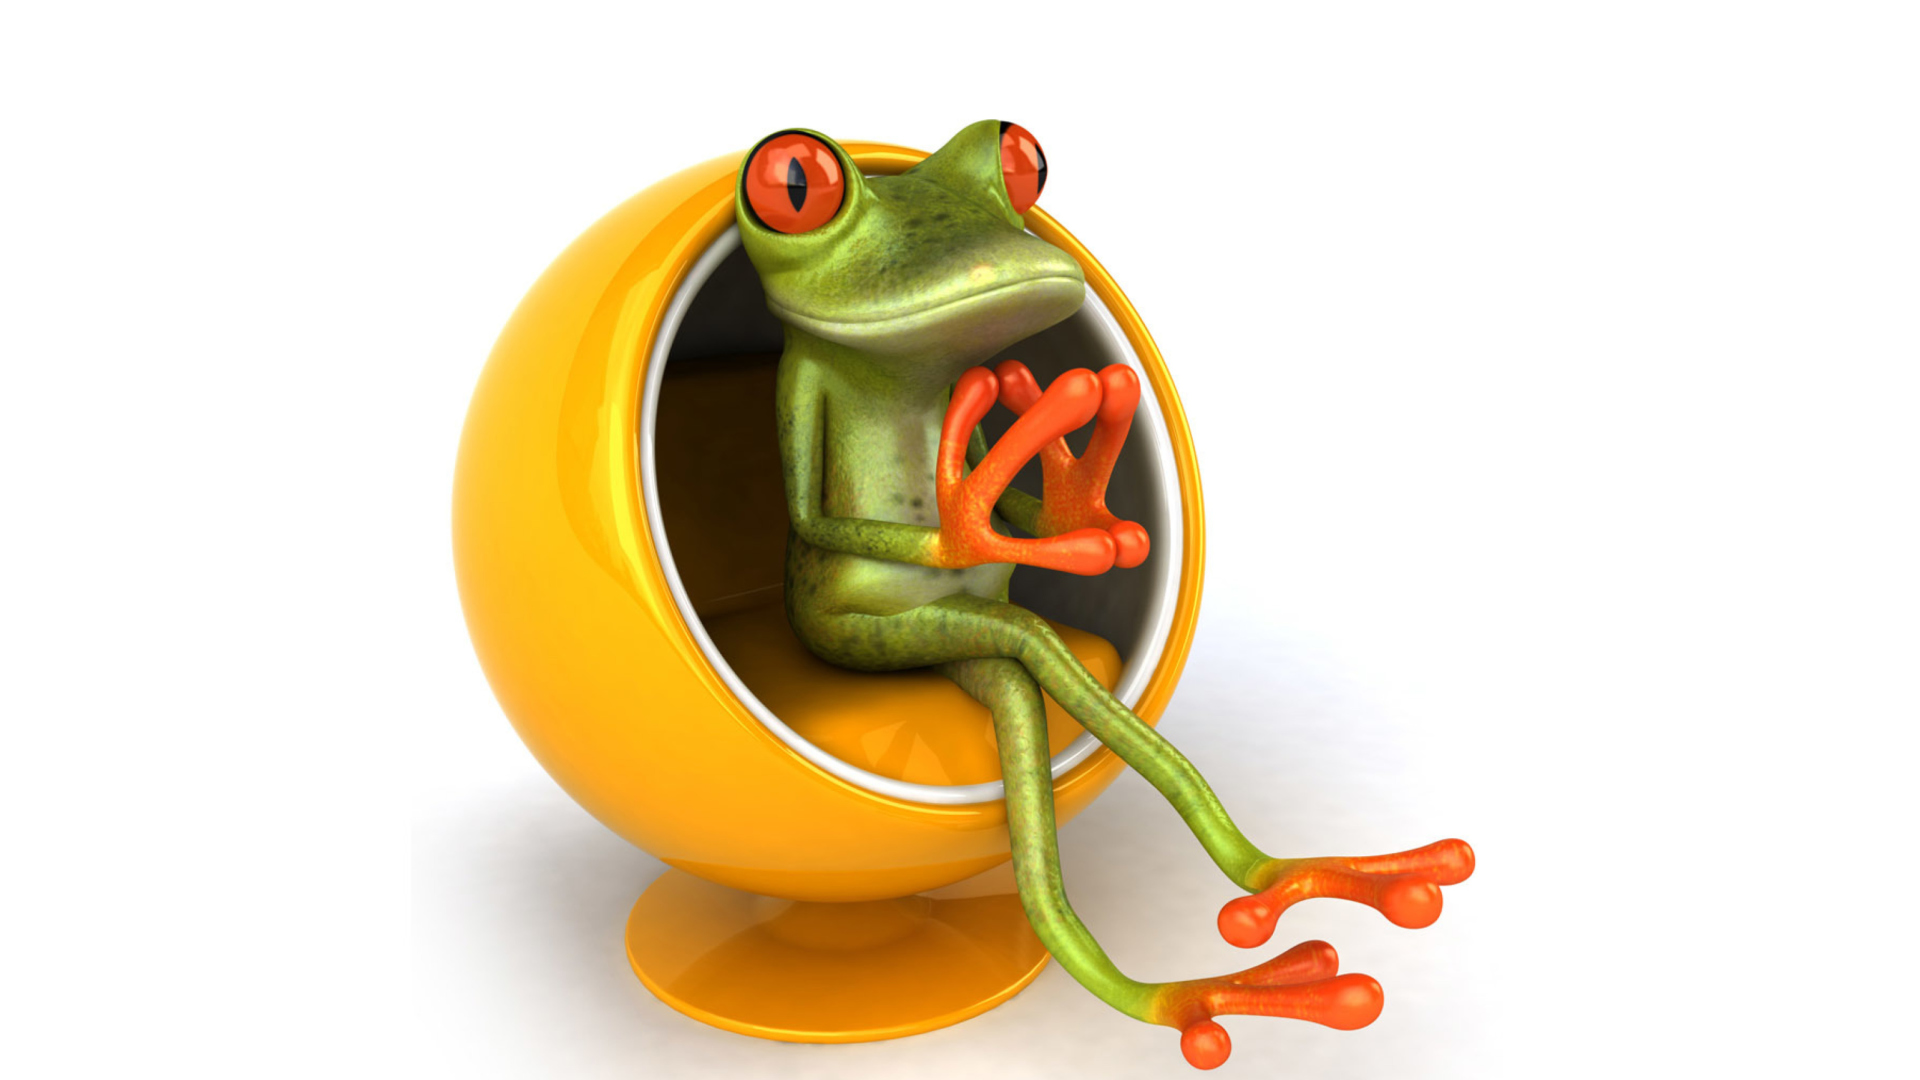 3D Frog On Yellow Chair wallpaper 1920x1080